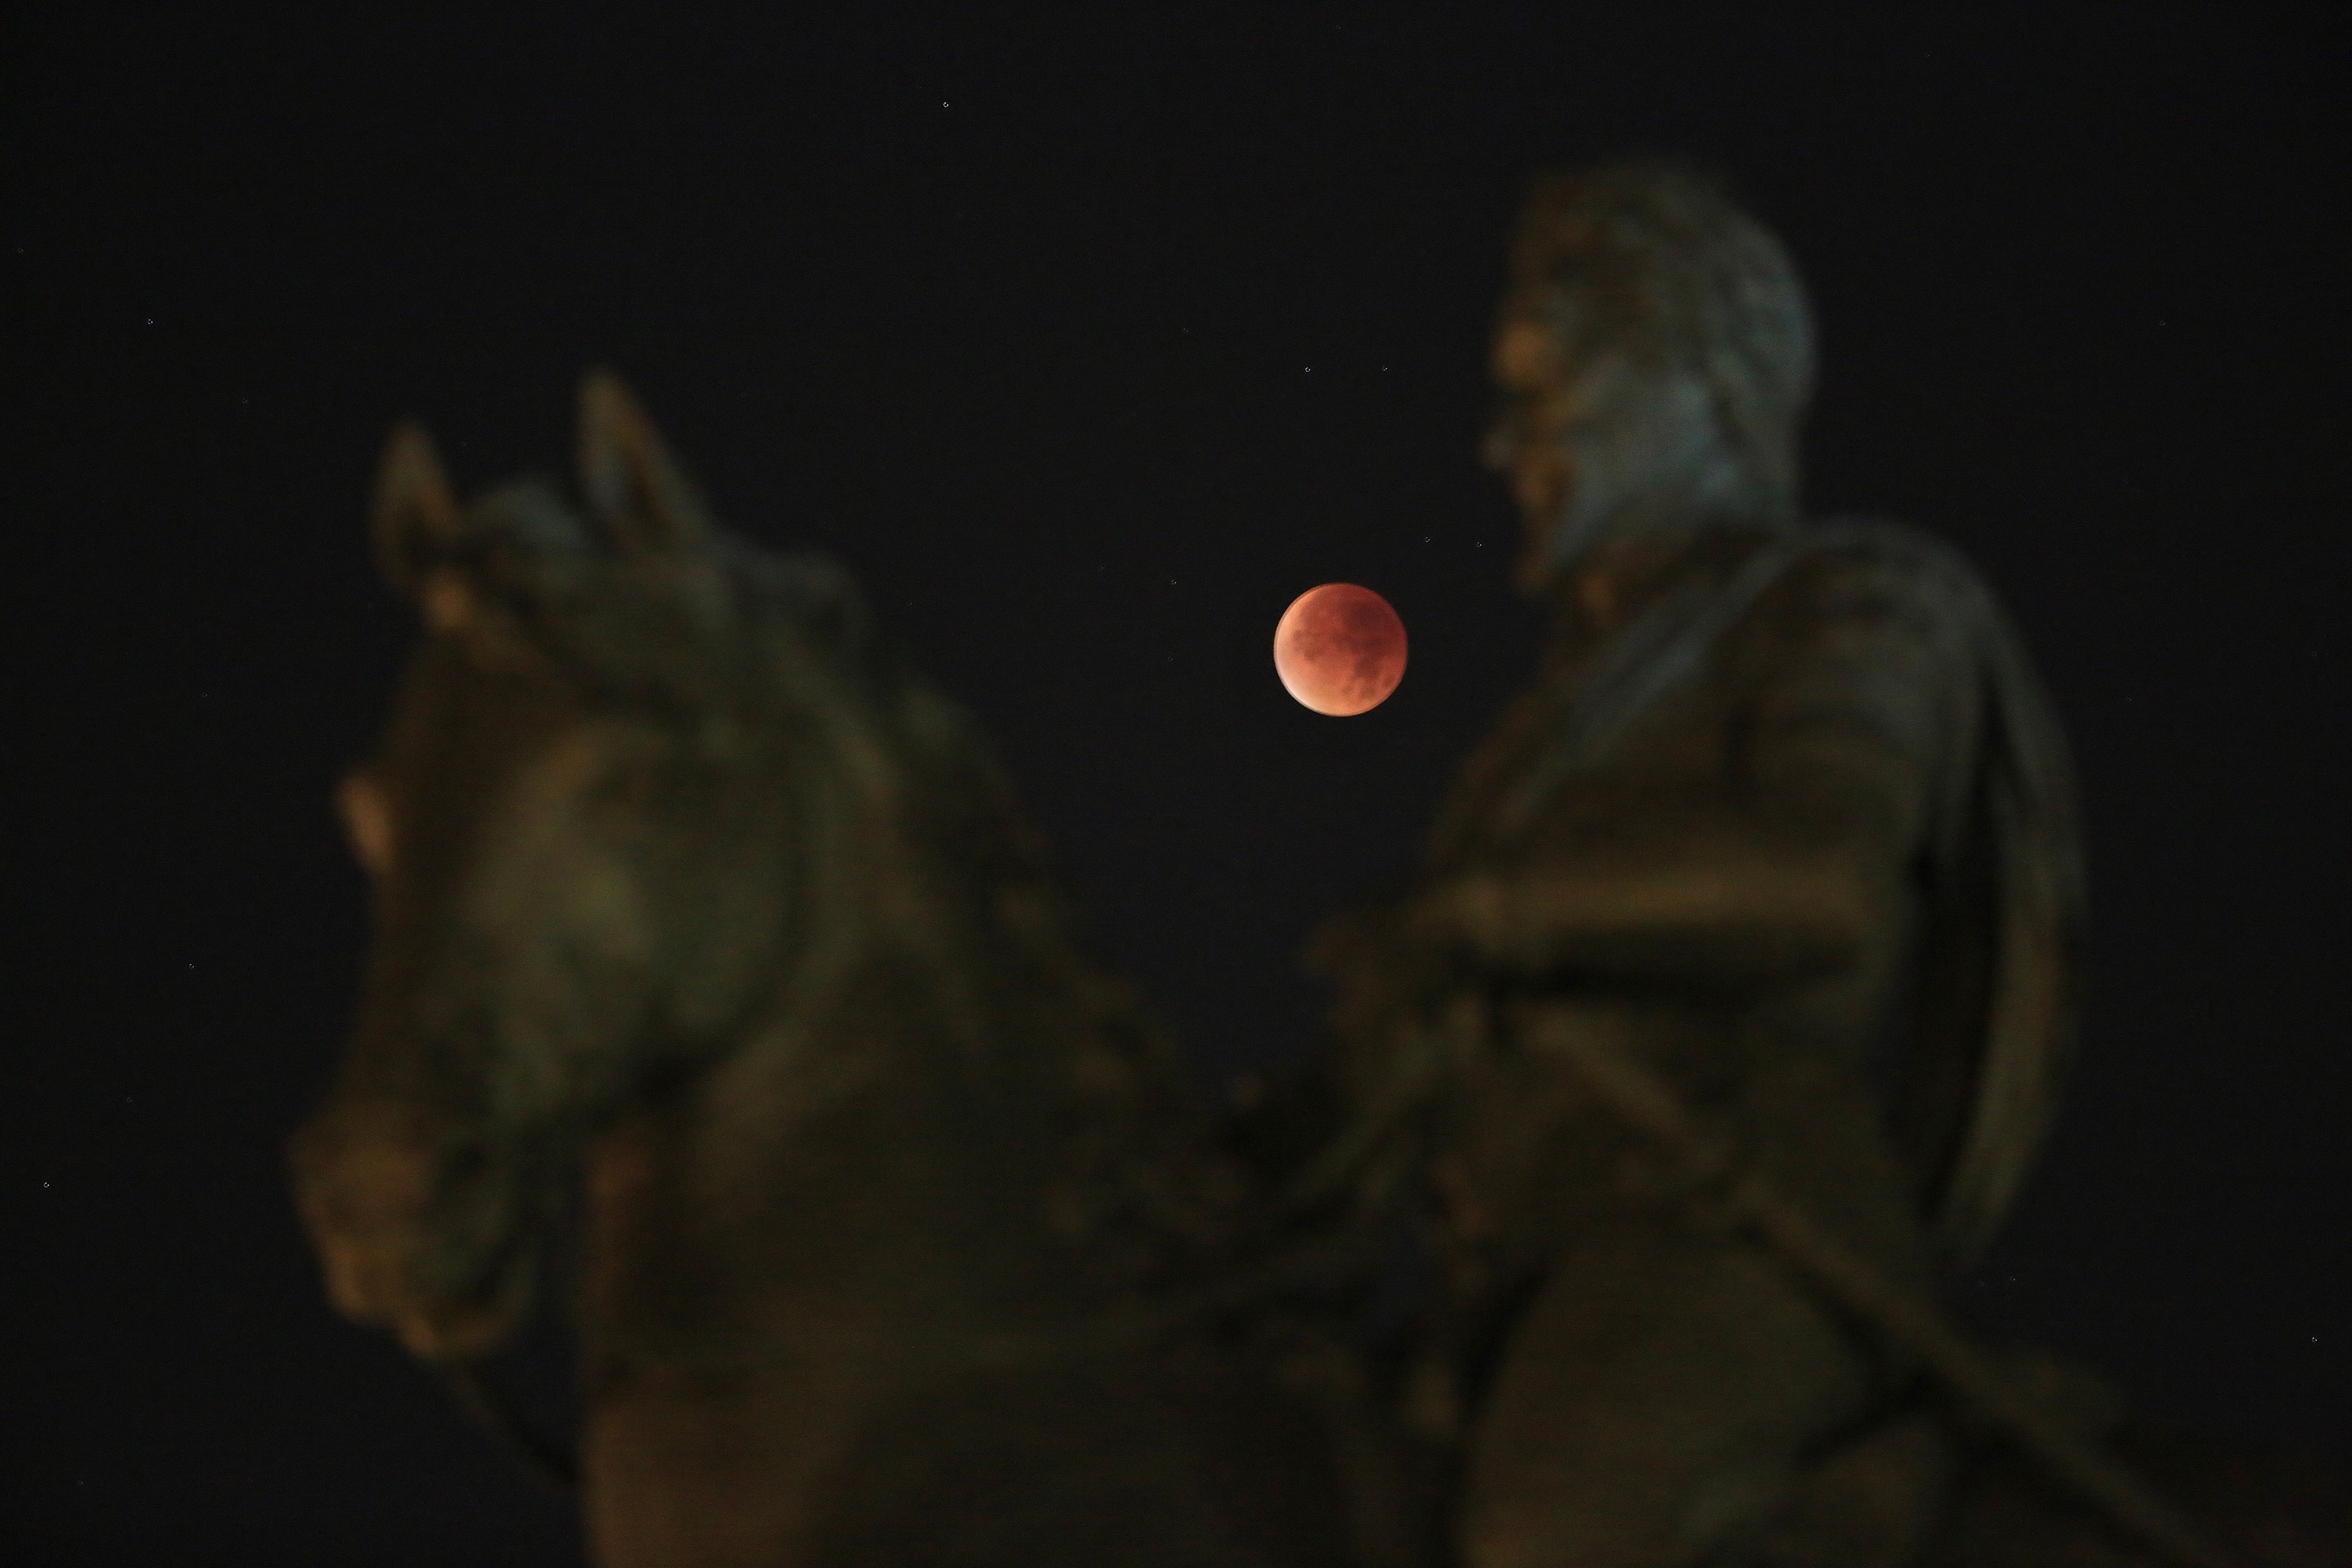 Supermoon is seen above the Statue of Henri IV, during a total lunar eclipse, in Paris, France